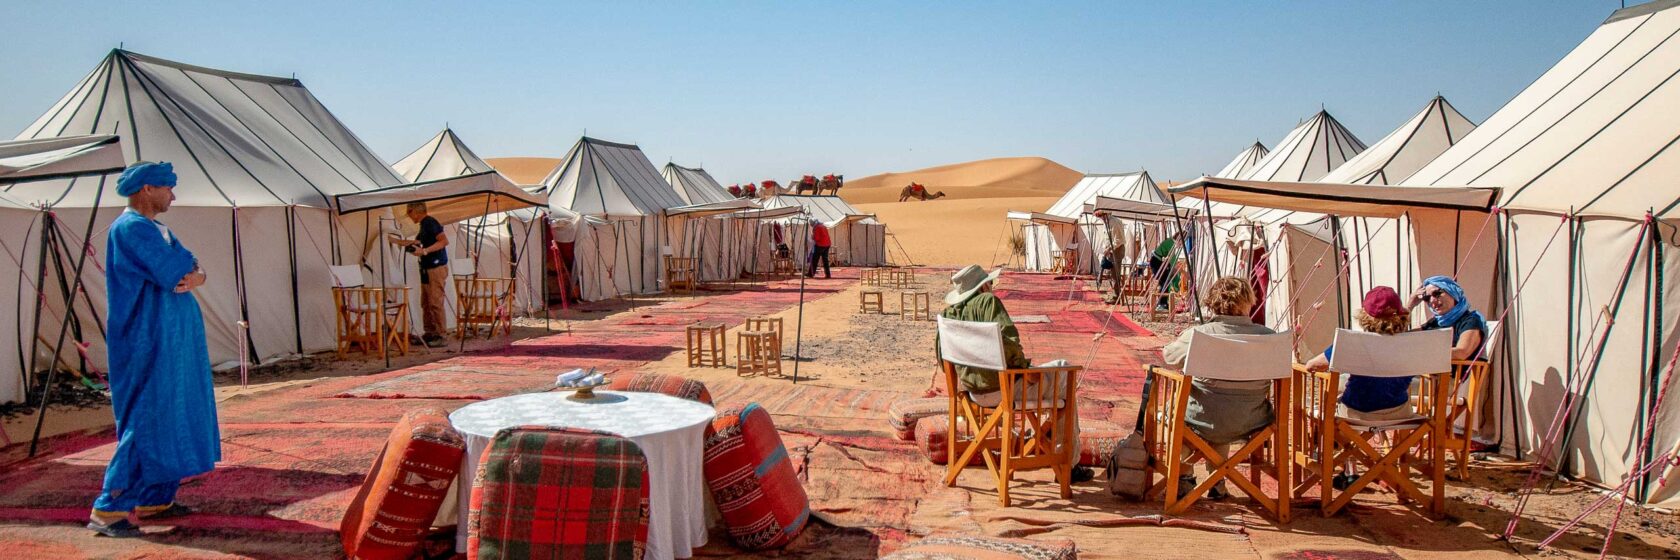 Travelers lounge among a dozen white canvas tents set up in Morocco’s Sahara Desert with colorful carpets and futons.